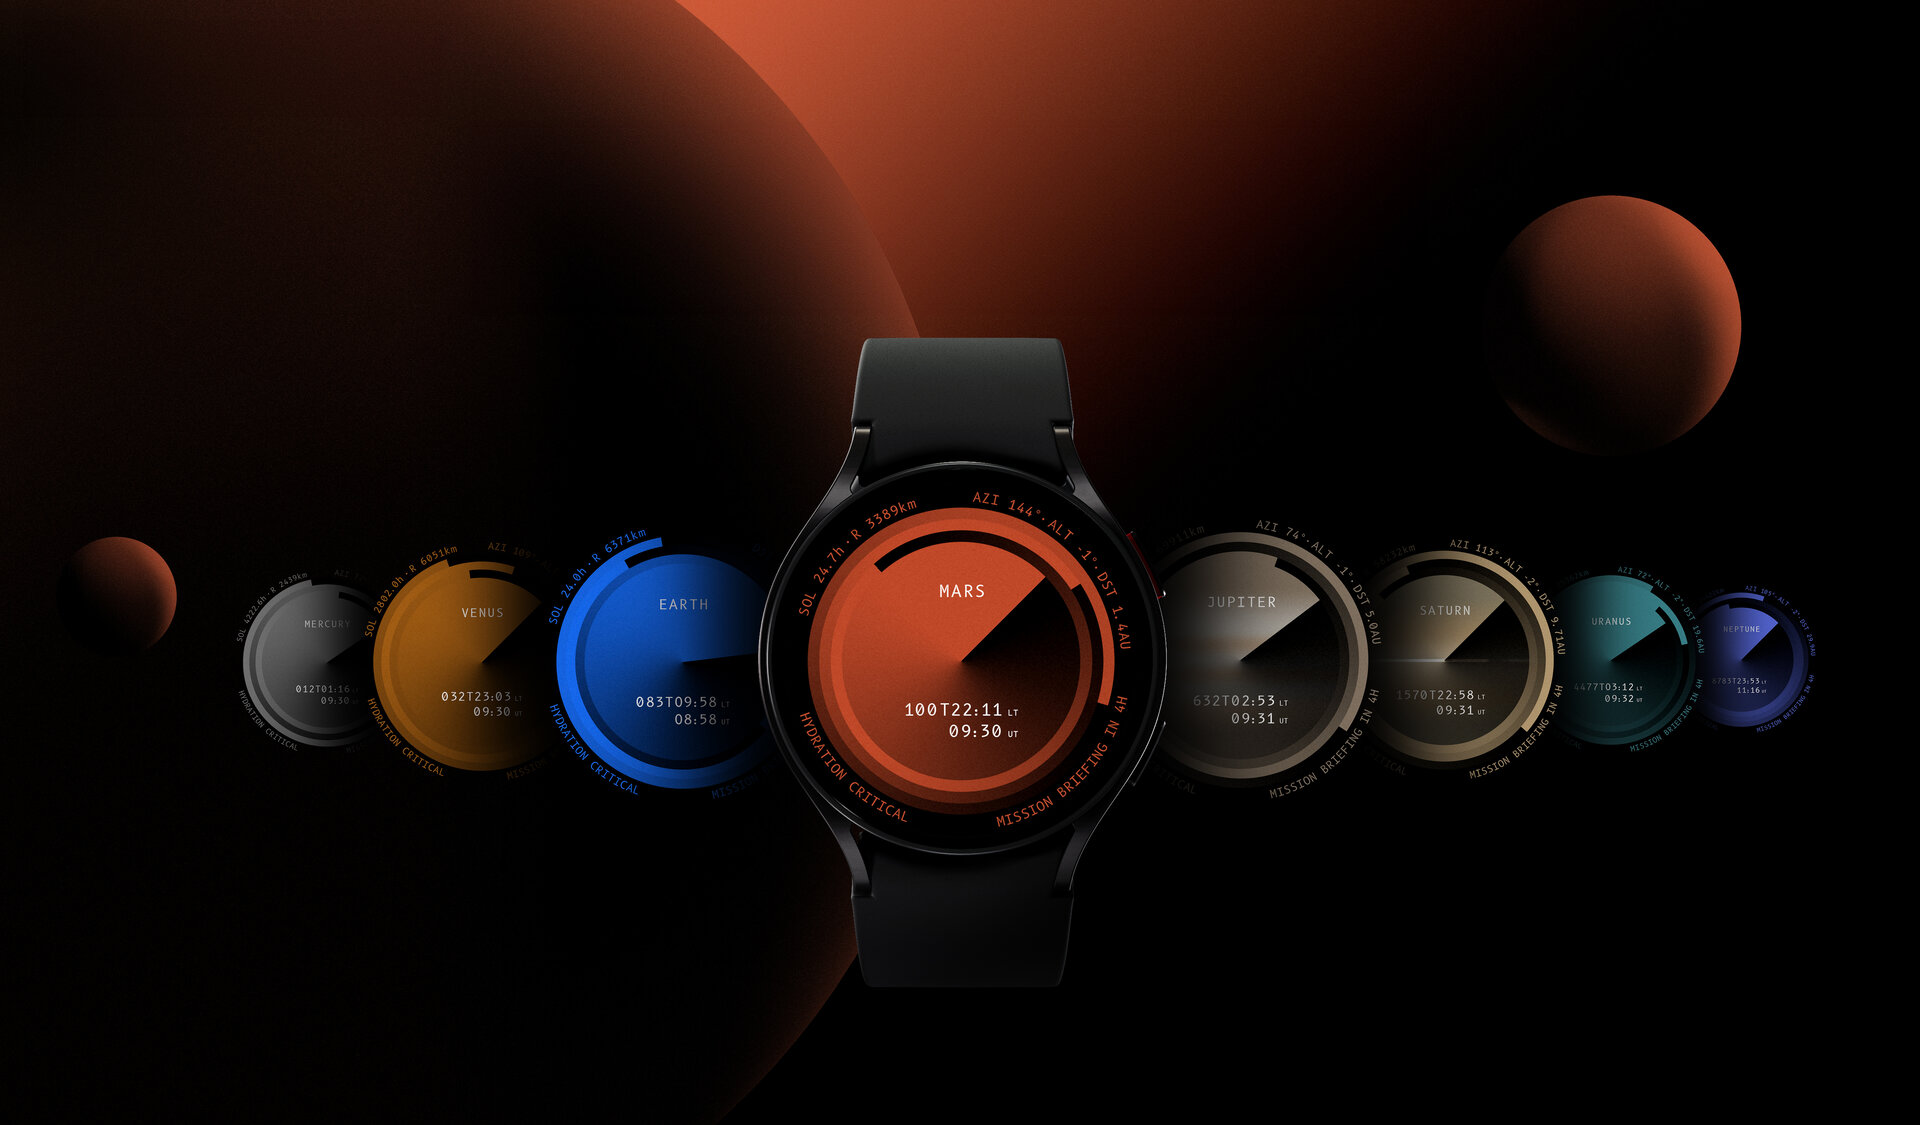 A selection of ESA X Samsung Galaxy Time watch faces